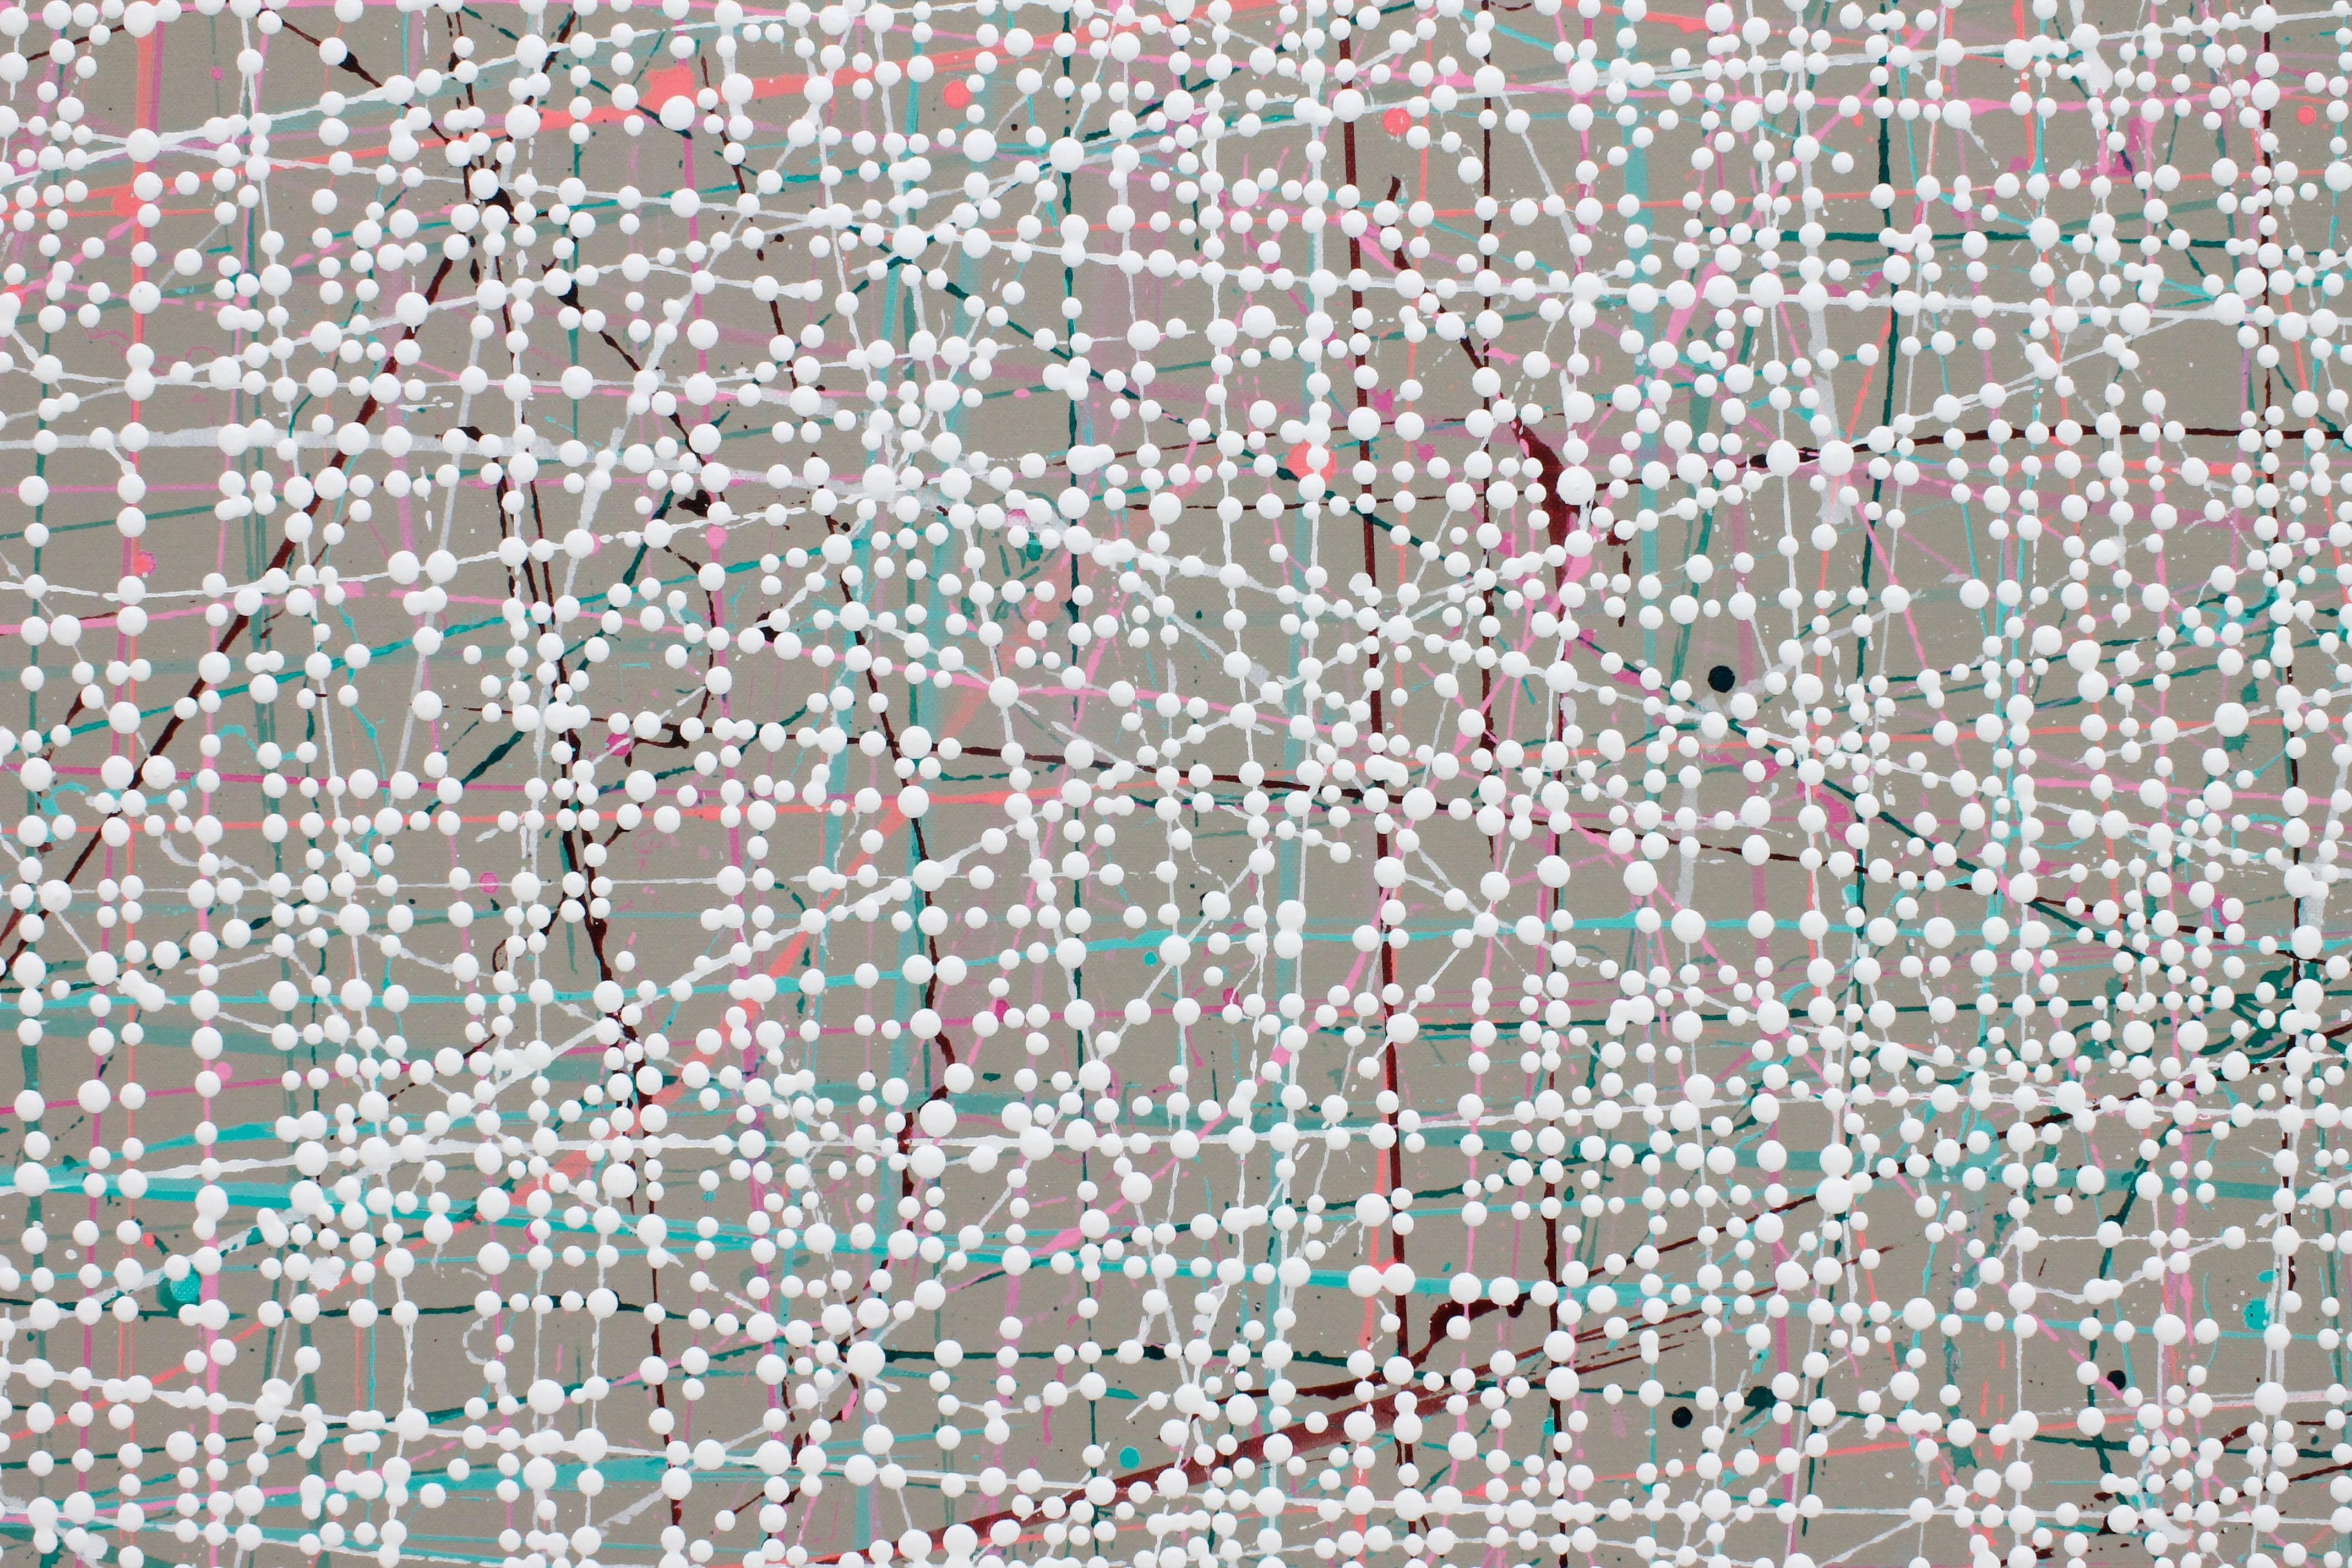 Colorful abstract painting 140cm x 180cm.  Thousands of fine acrylic paint dots are applied by hand by the artist over a network of fine lines. The process took weeks to finish. From a distance one encounters color surfaces of mint green and red.